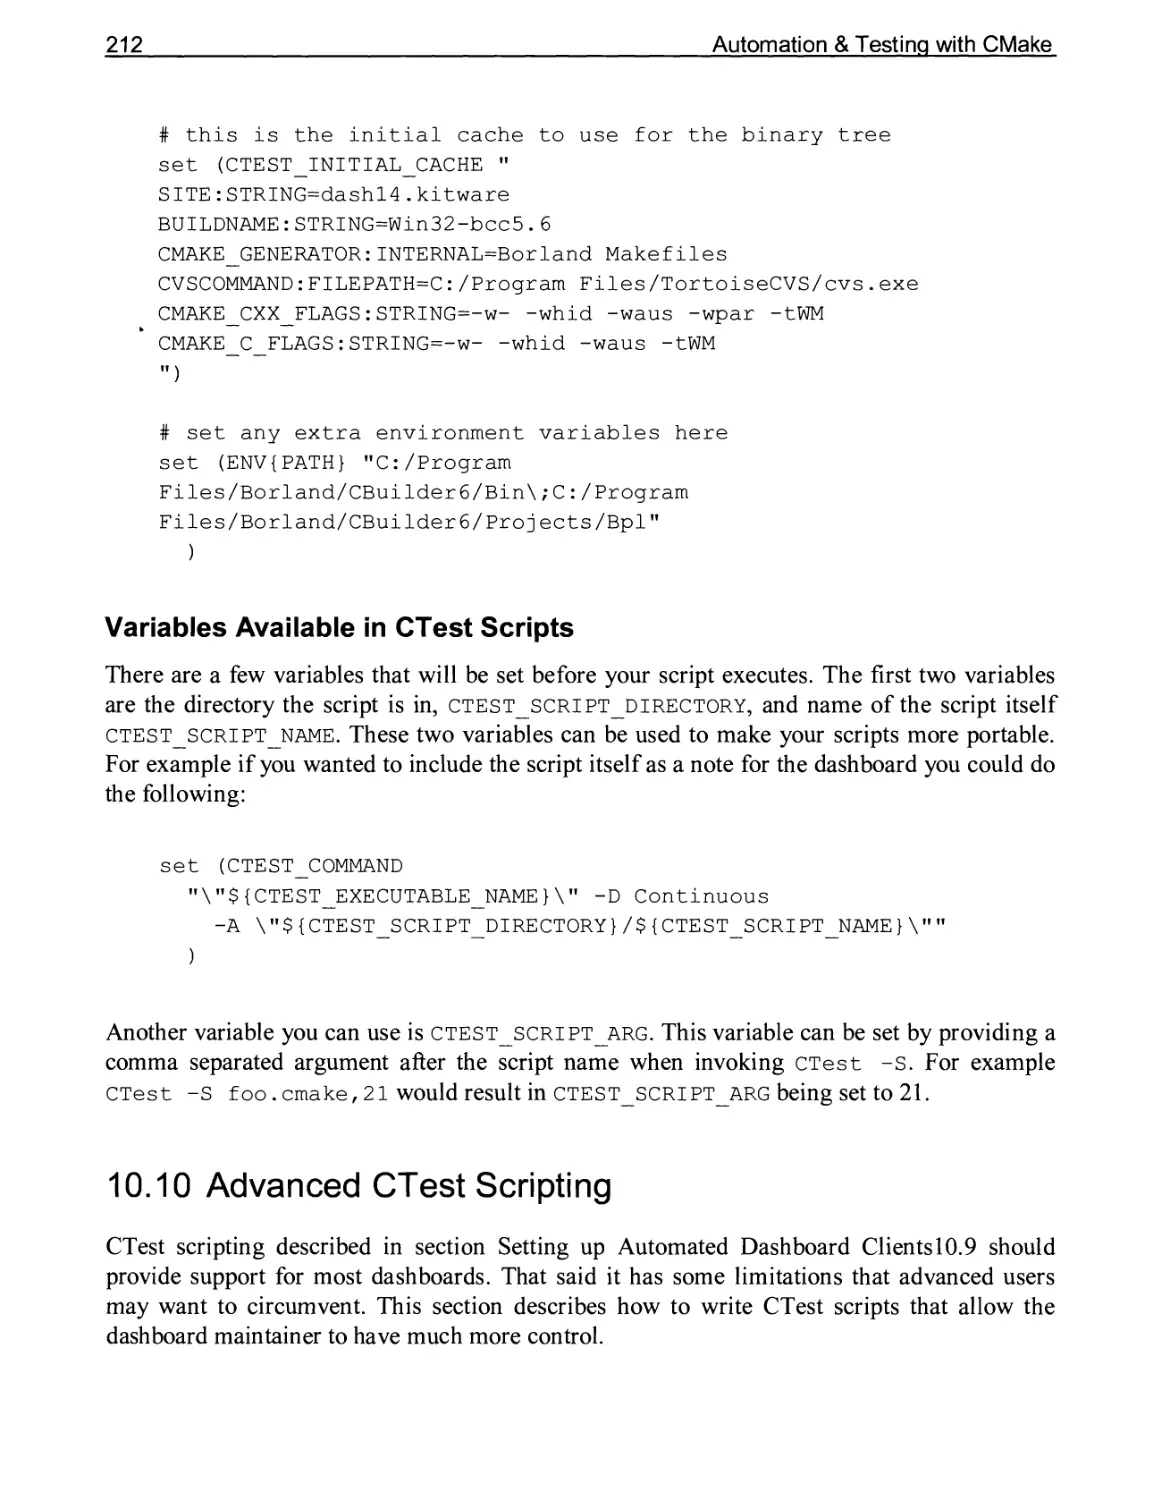 Variables Available in CTest Scripts
10.10 Advanced CTest Scripting